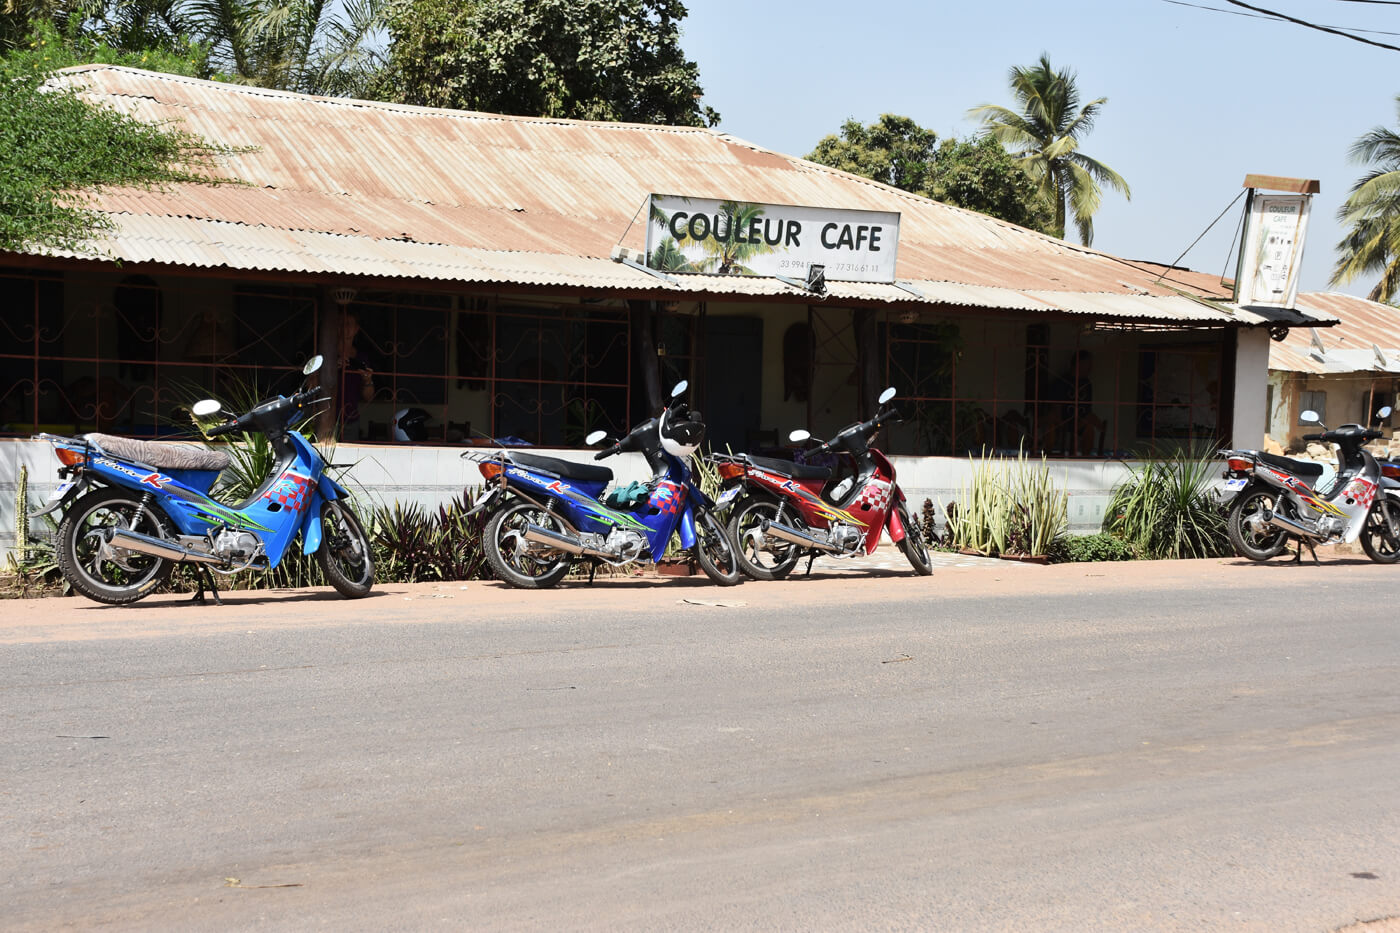 Couleur Cafe in Kafountine, Casamance, Senegal